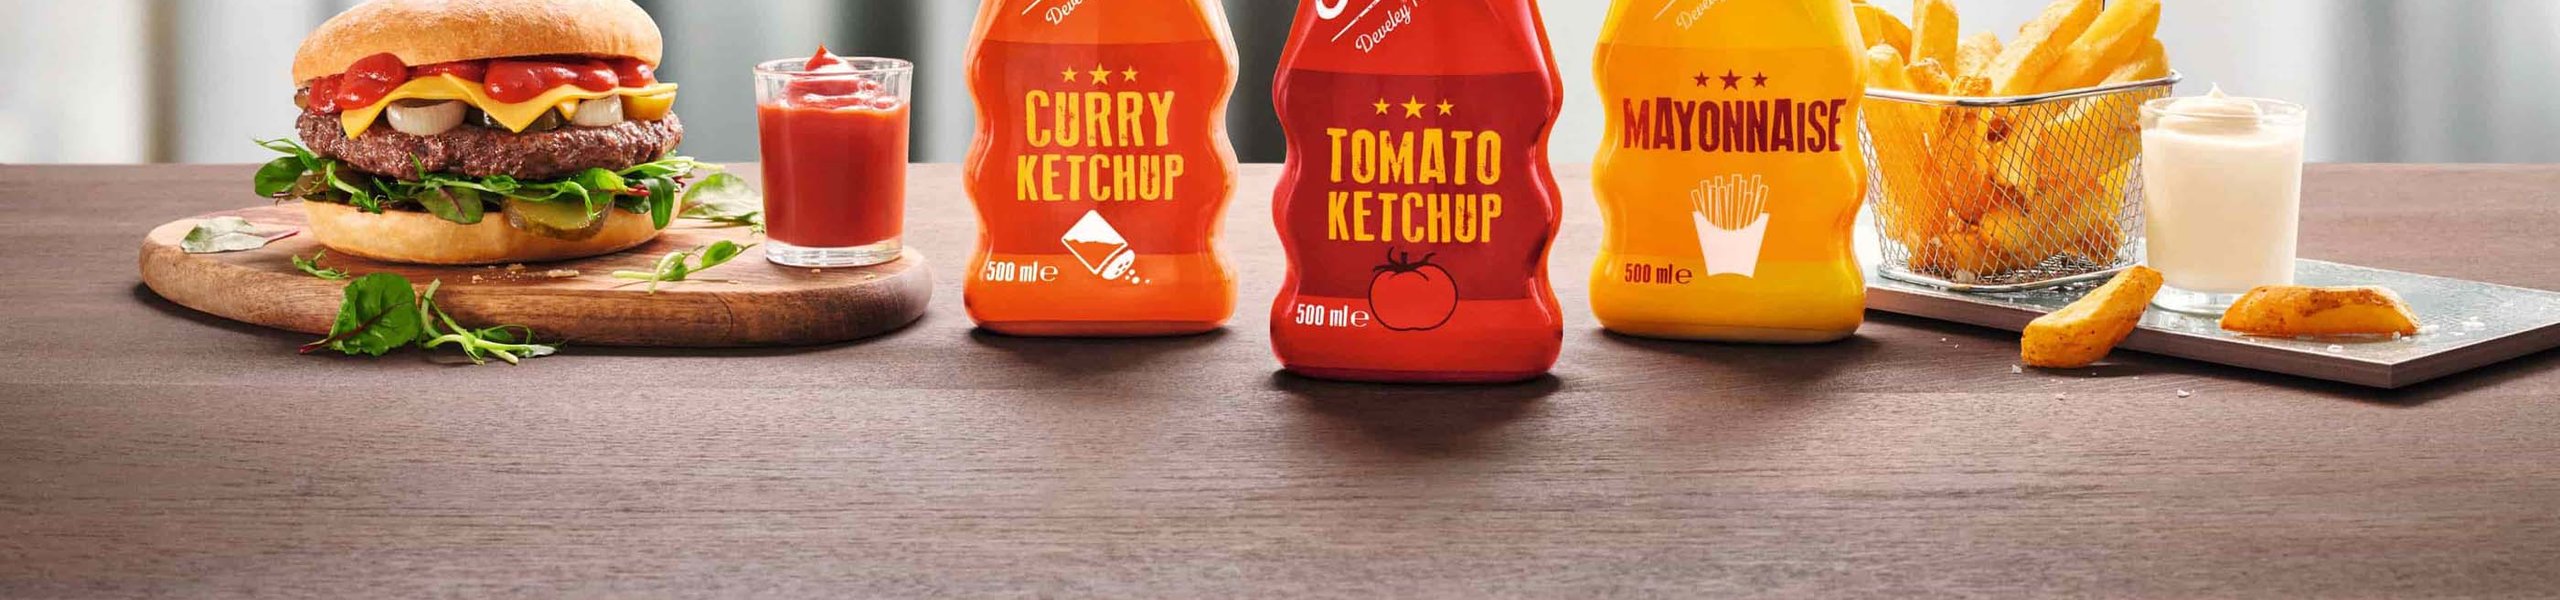 Our Original Hintergrund: Tomato Ketchup, Curry Ketchup und Mayonnaise